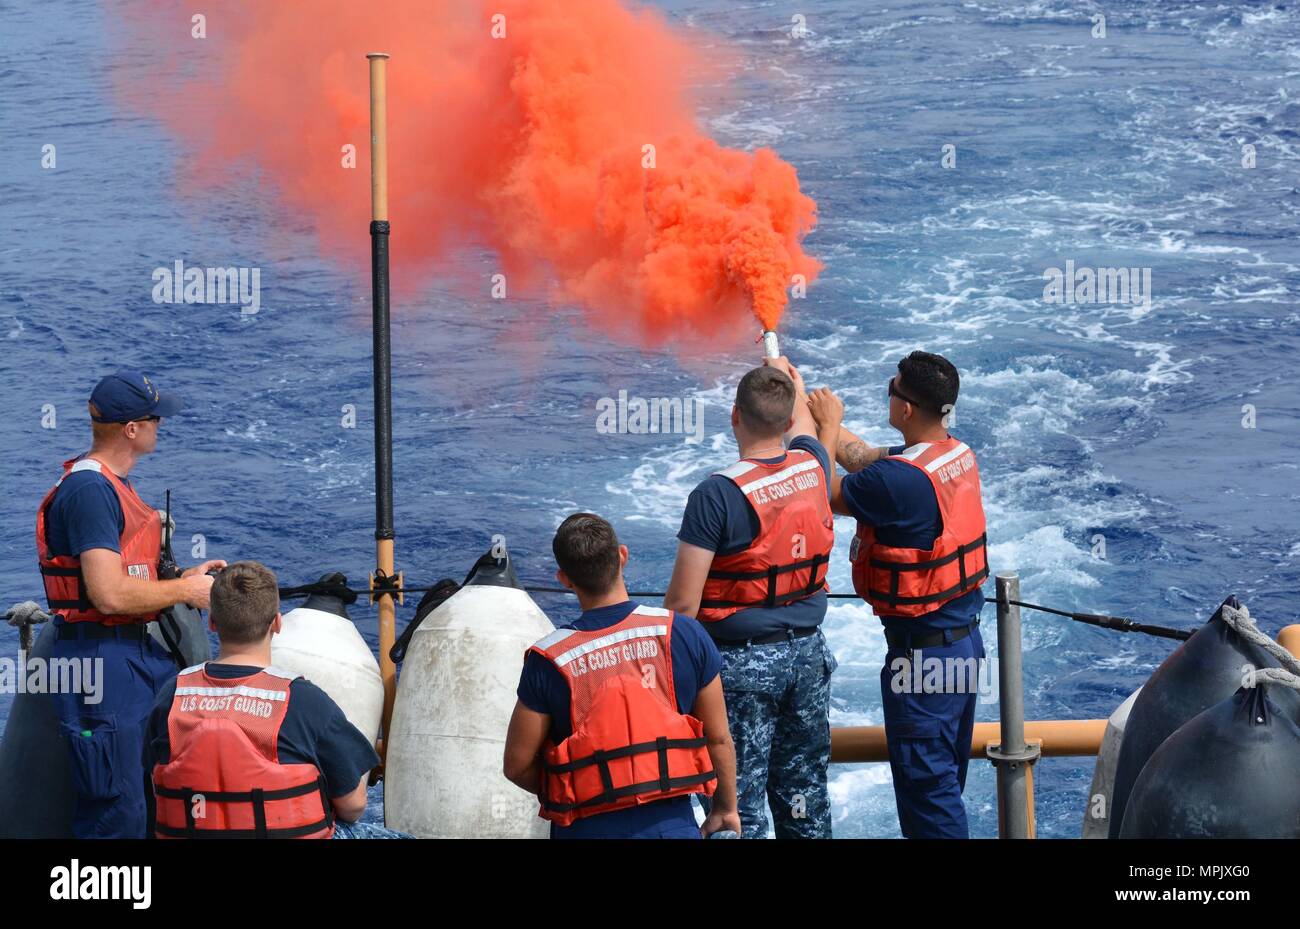 A Coast Guard crewmember provides pyrotechnic training to a U.S. Naval Sea Cadet Corps cadet aboard the Coast Guard Cutter Galveston Island (WPB 1349) off Honolulu, March 11, 2017. The USNSCC is a Navy-based organization, which serves to teach teens about sea-going military services, U.S. naval operations and training, community service, discipline and teamwork. (U.S. Coast Guard photo by Petty Officer 1st Class Joe Jorgenson/Released) Stock Photo